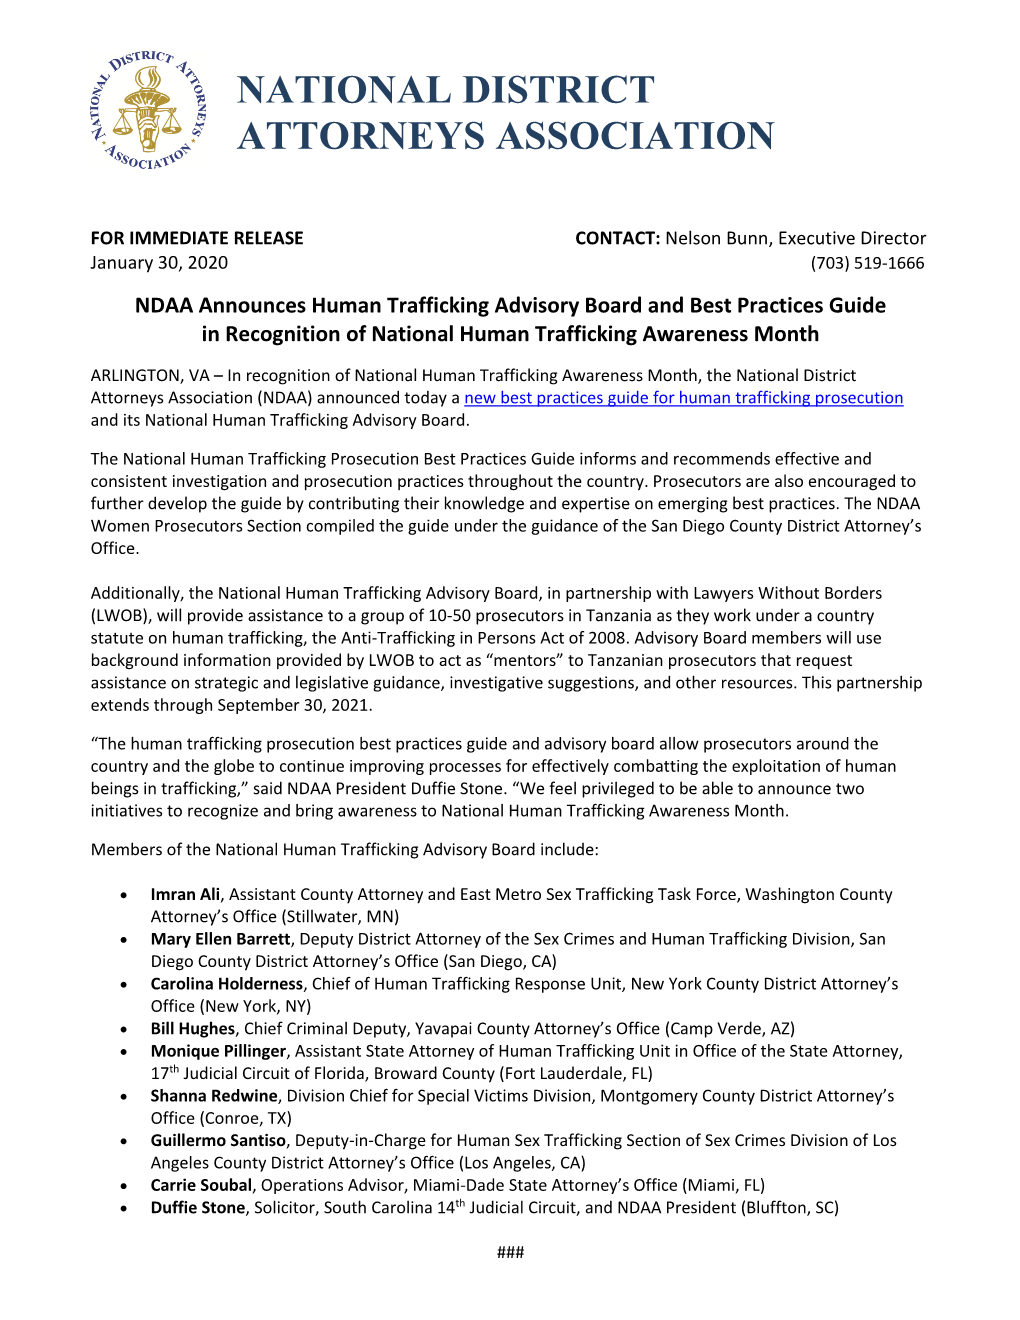 NDAA Announces Human Trafficking Advisory Board and Best Practices Guide in Recognition of National Human Trafficking Awareness Month